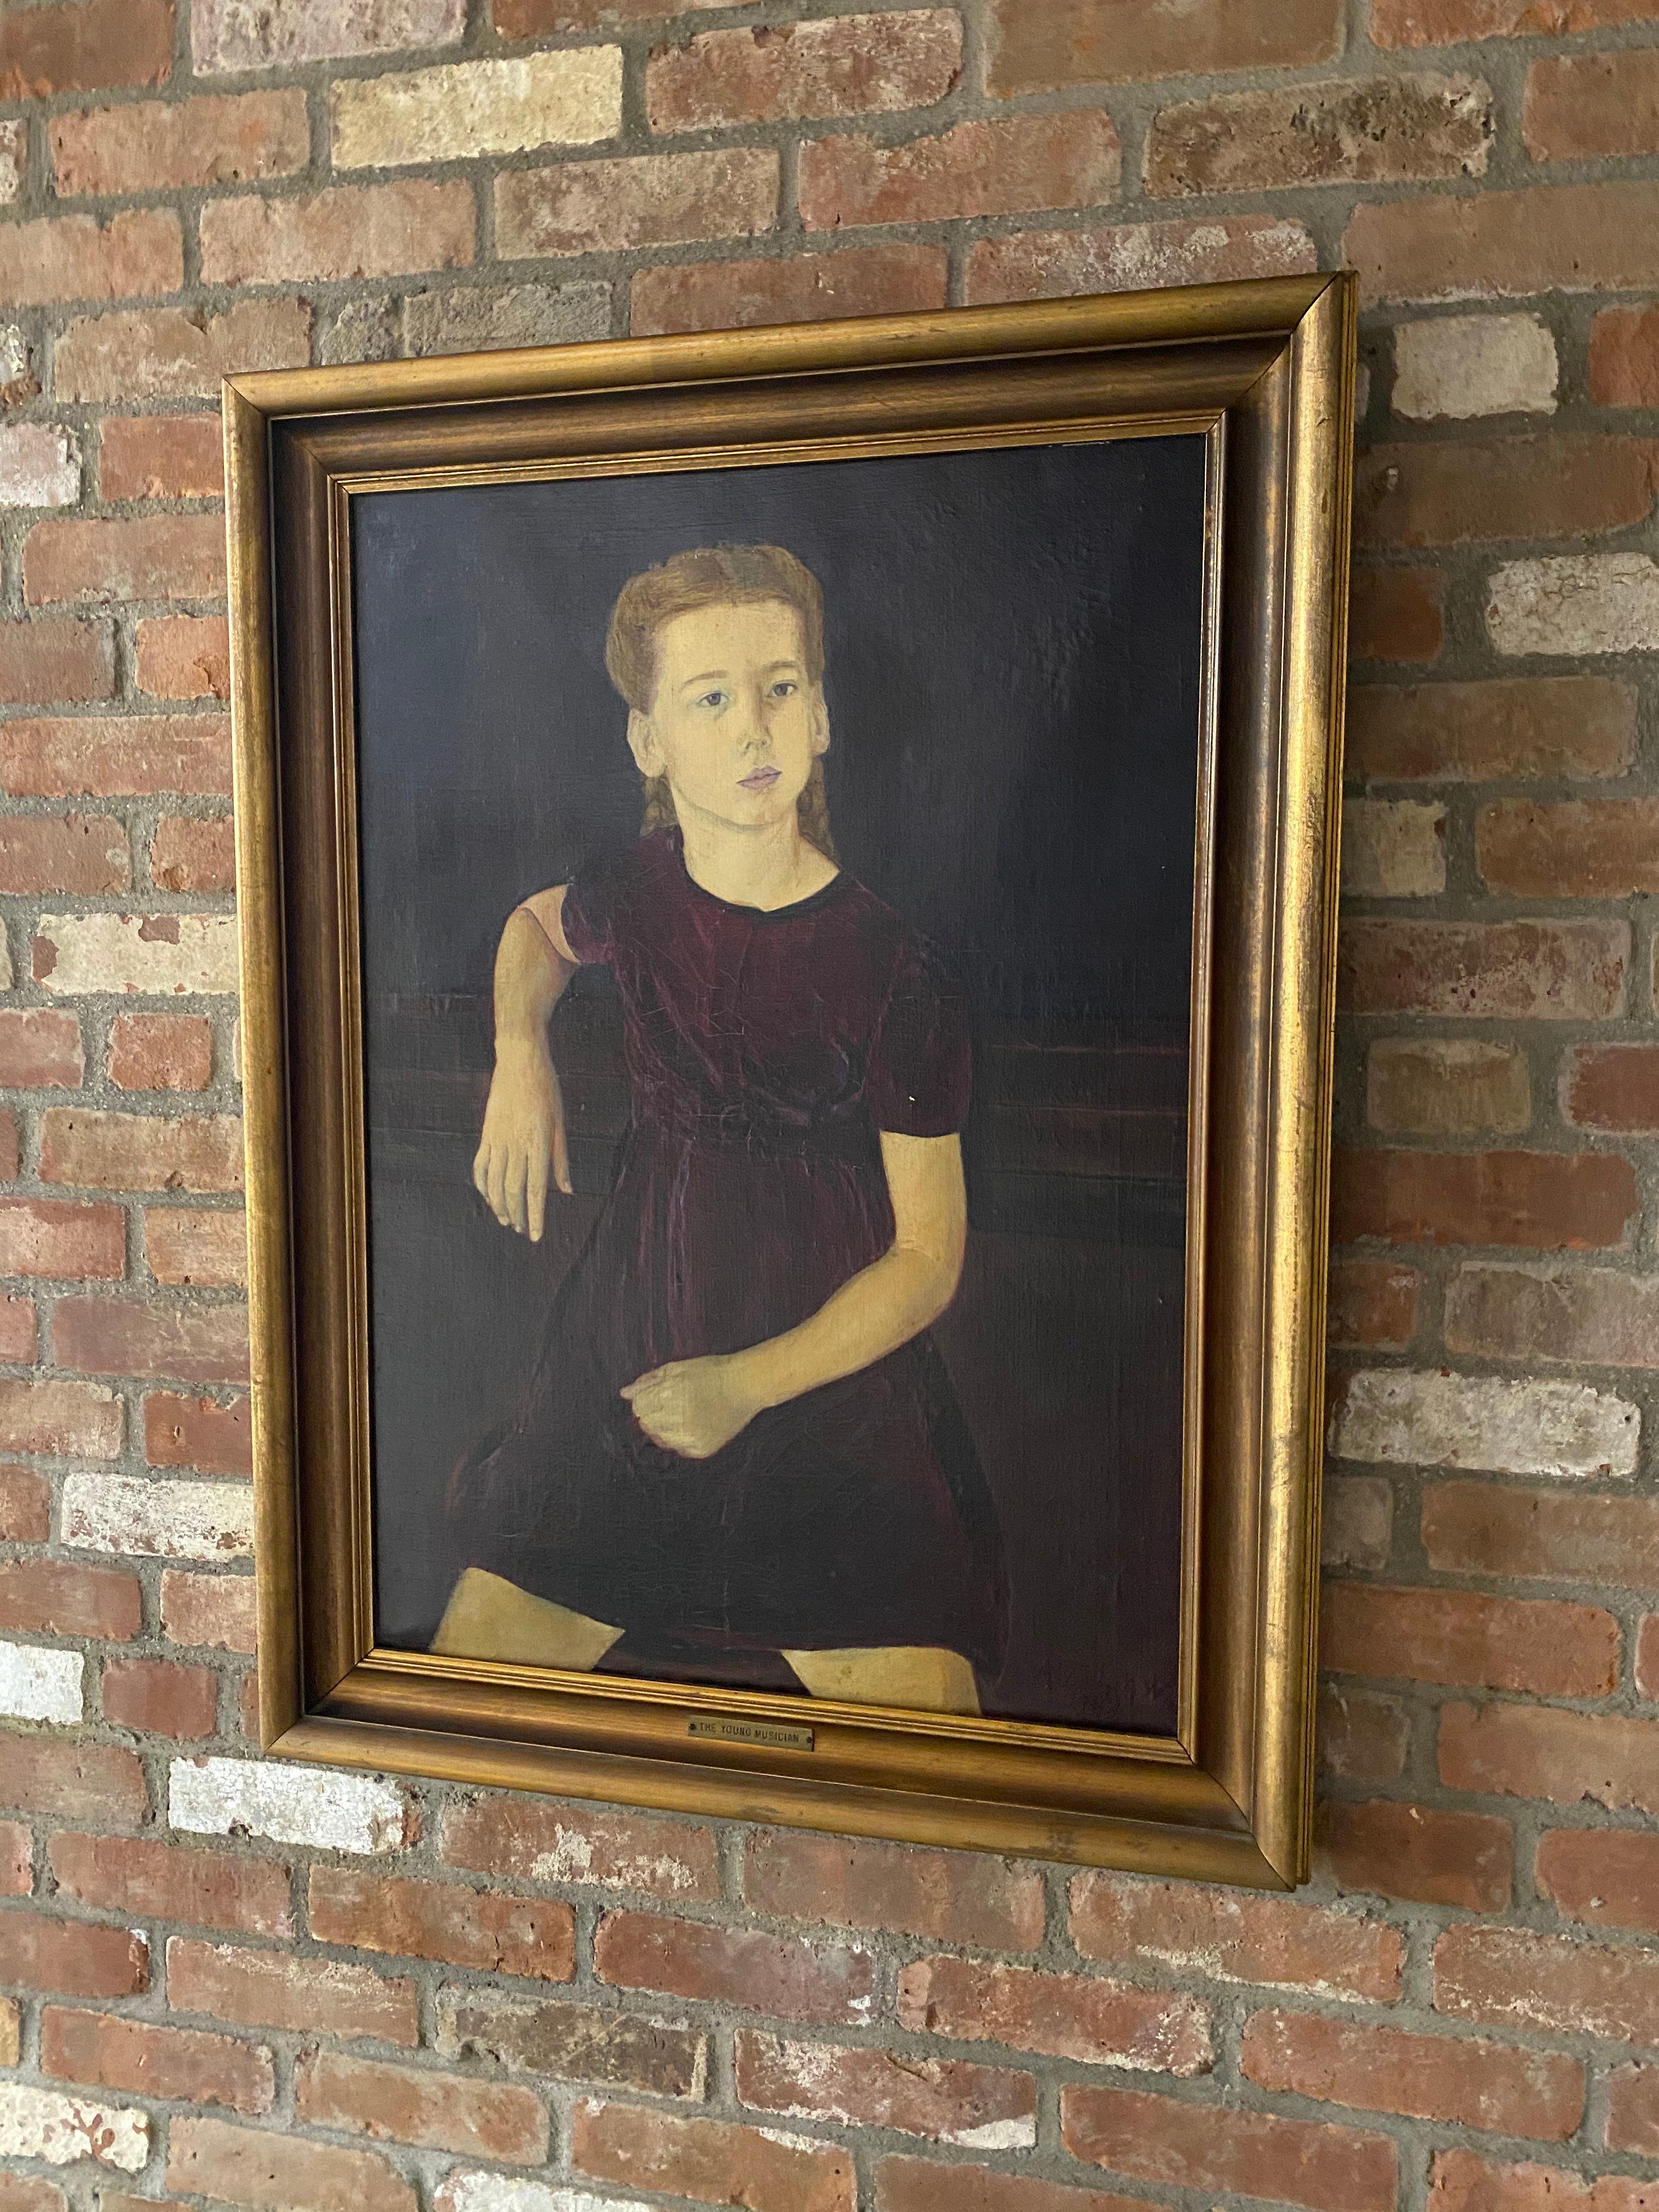 Oil paint on canvas, circa 1944. Signed and dated lower right, A.T. Law, '44. Sweet, yet serious portrait of budding musician. Painted at the height of WWII. The piece still retains the exhibition label and framer's label. Good overall condition